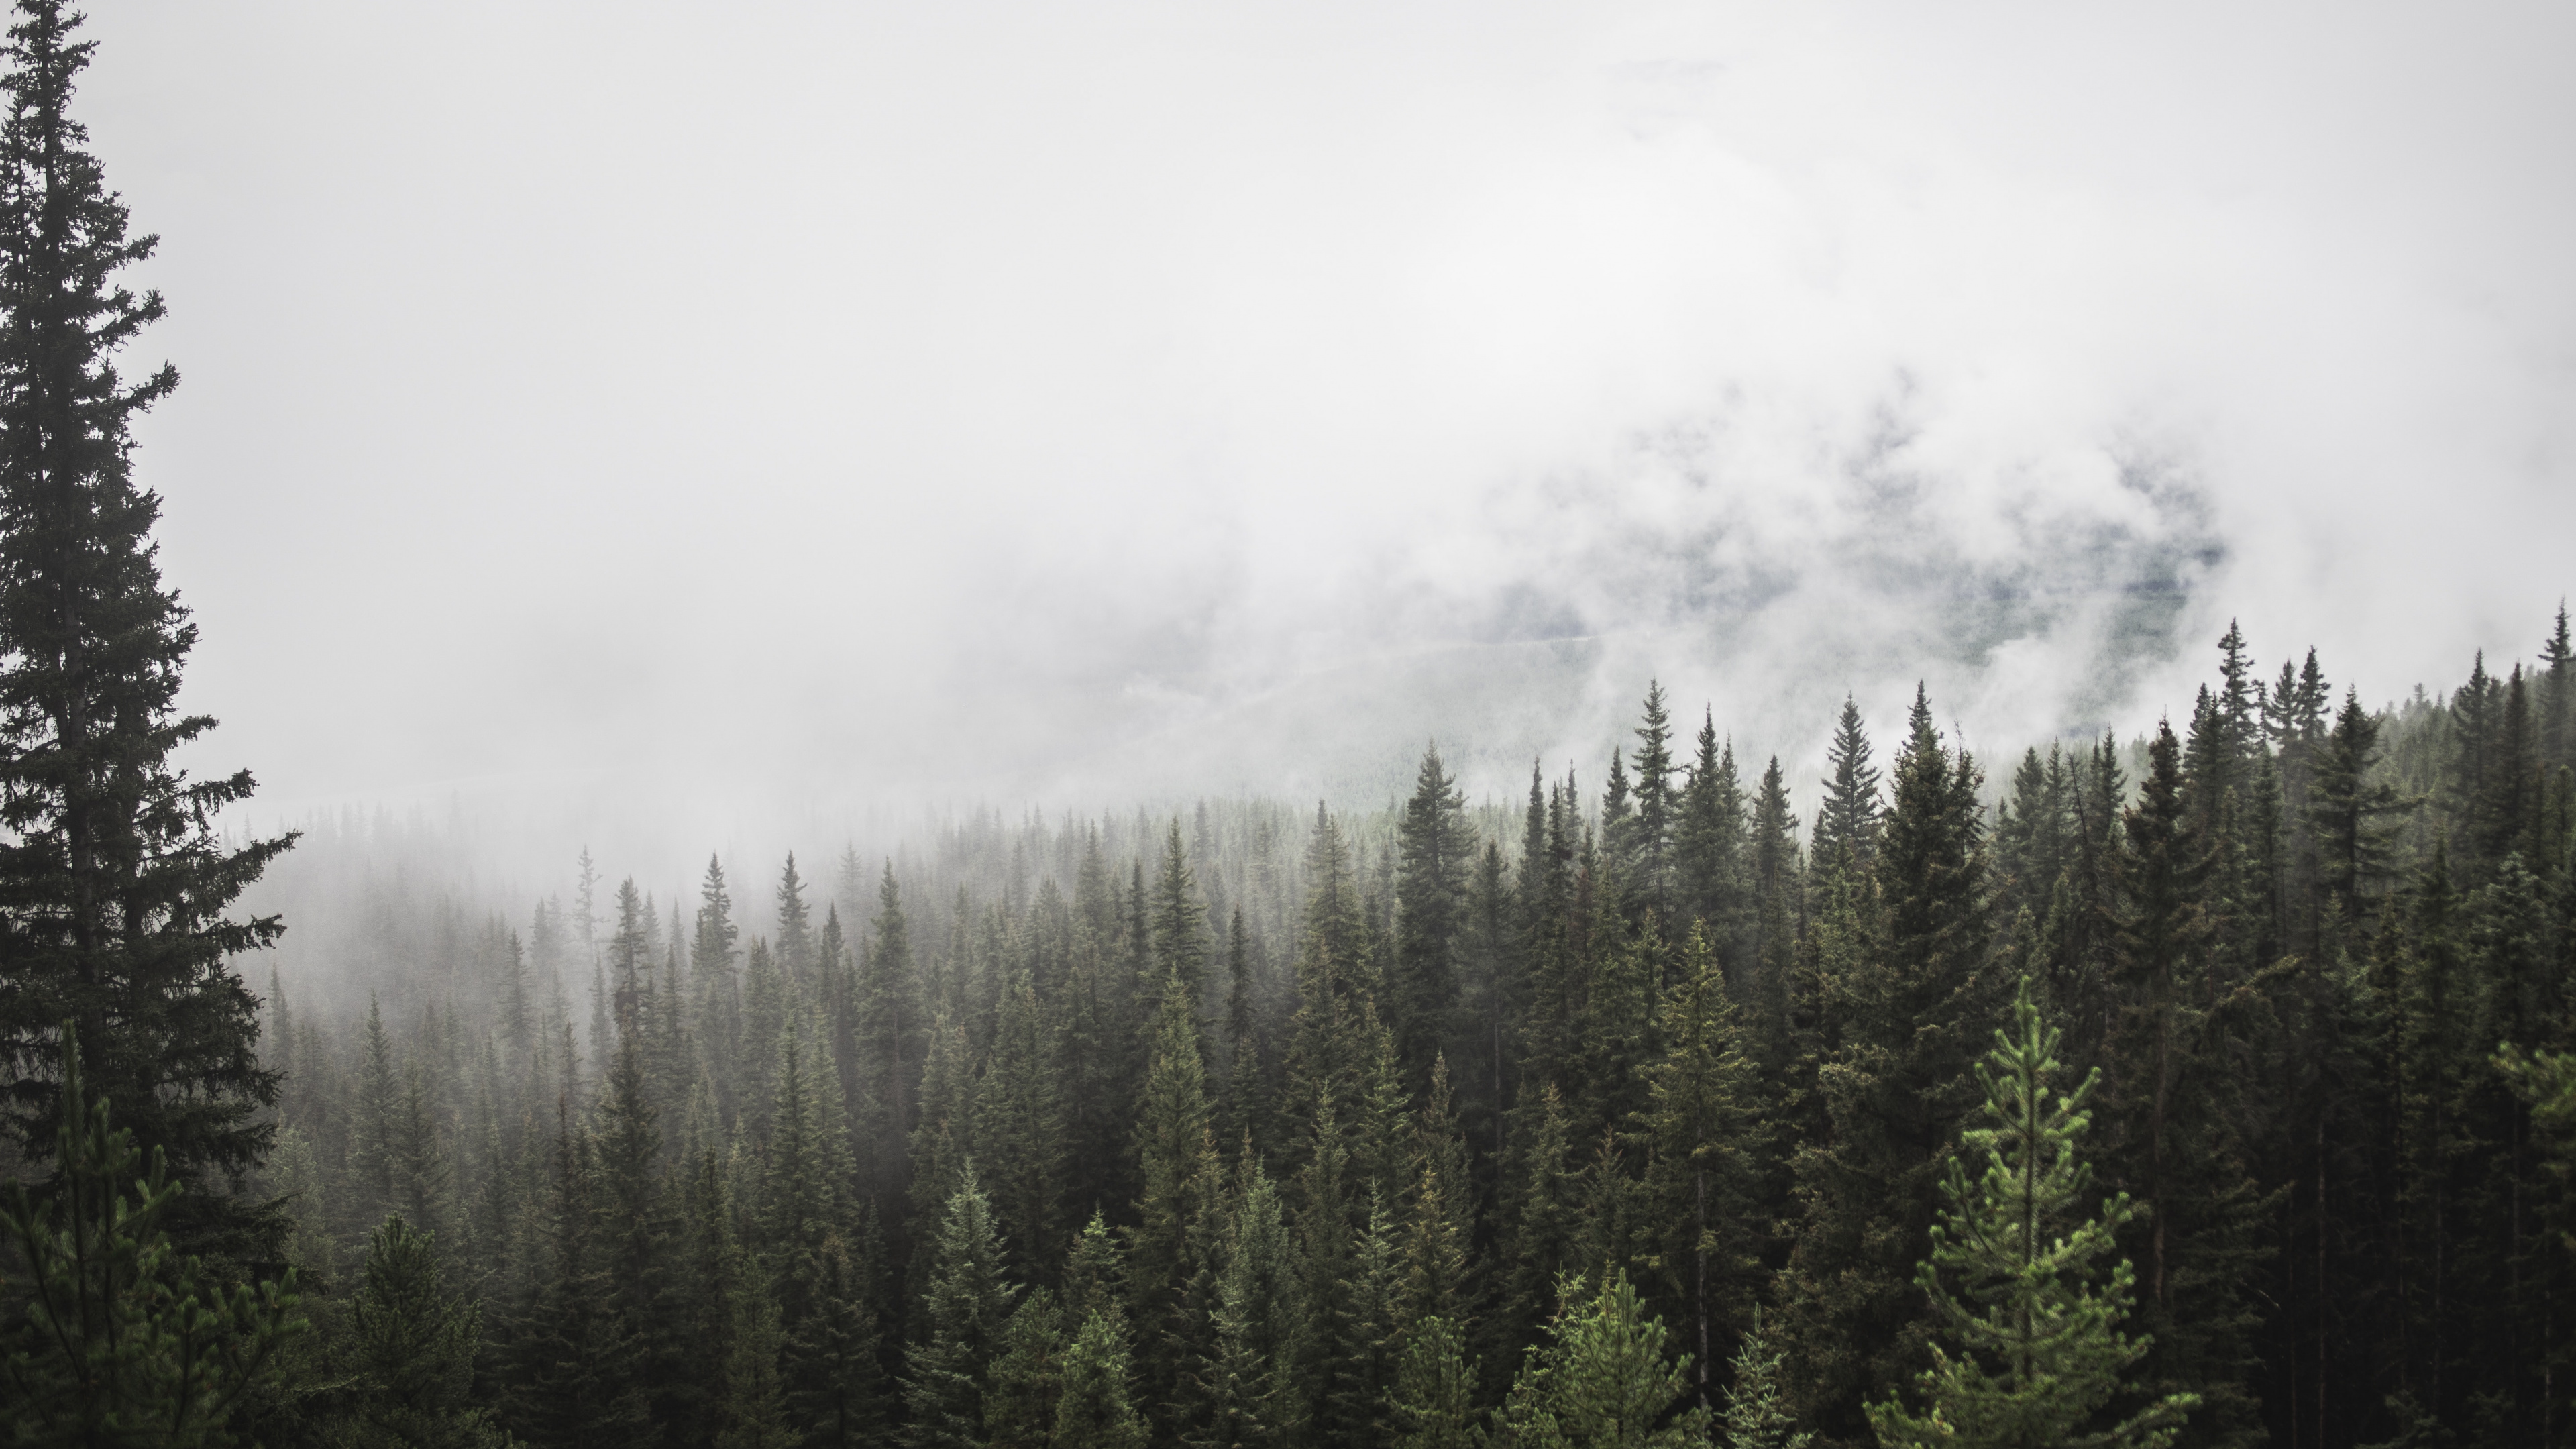 Green Pine Trees Covered With Fog. Wallpaper in 3840x2160 Resolution